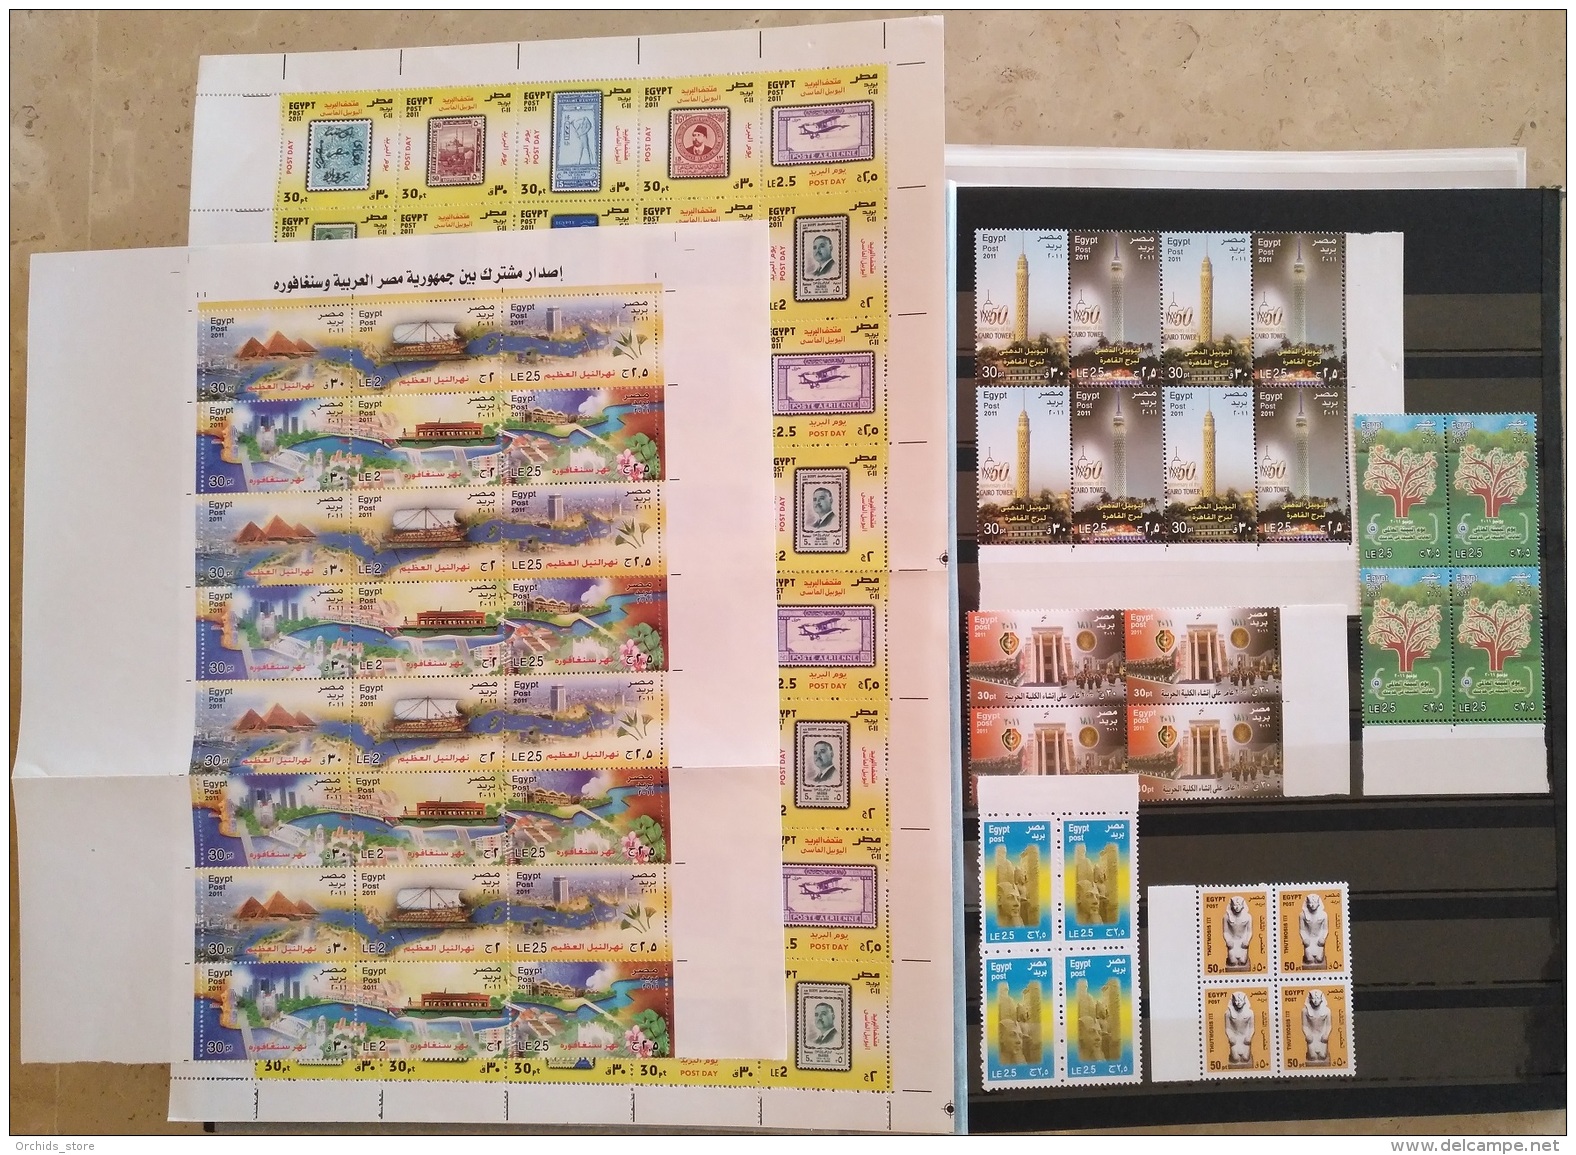 E24 - Egypt 2011 Complete YEAR Issues Unit - 22 Stamps ALL BLOCKS/4 (including 2 Sheets) - MNH Superb - Gebruikt